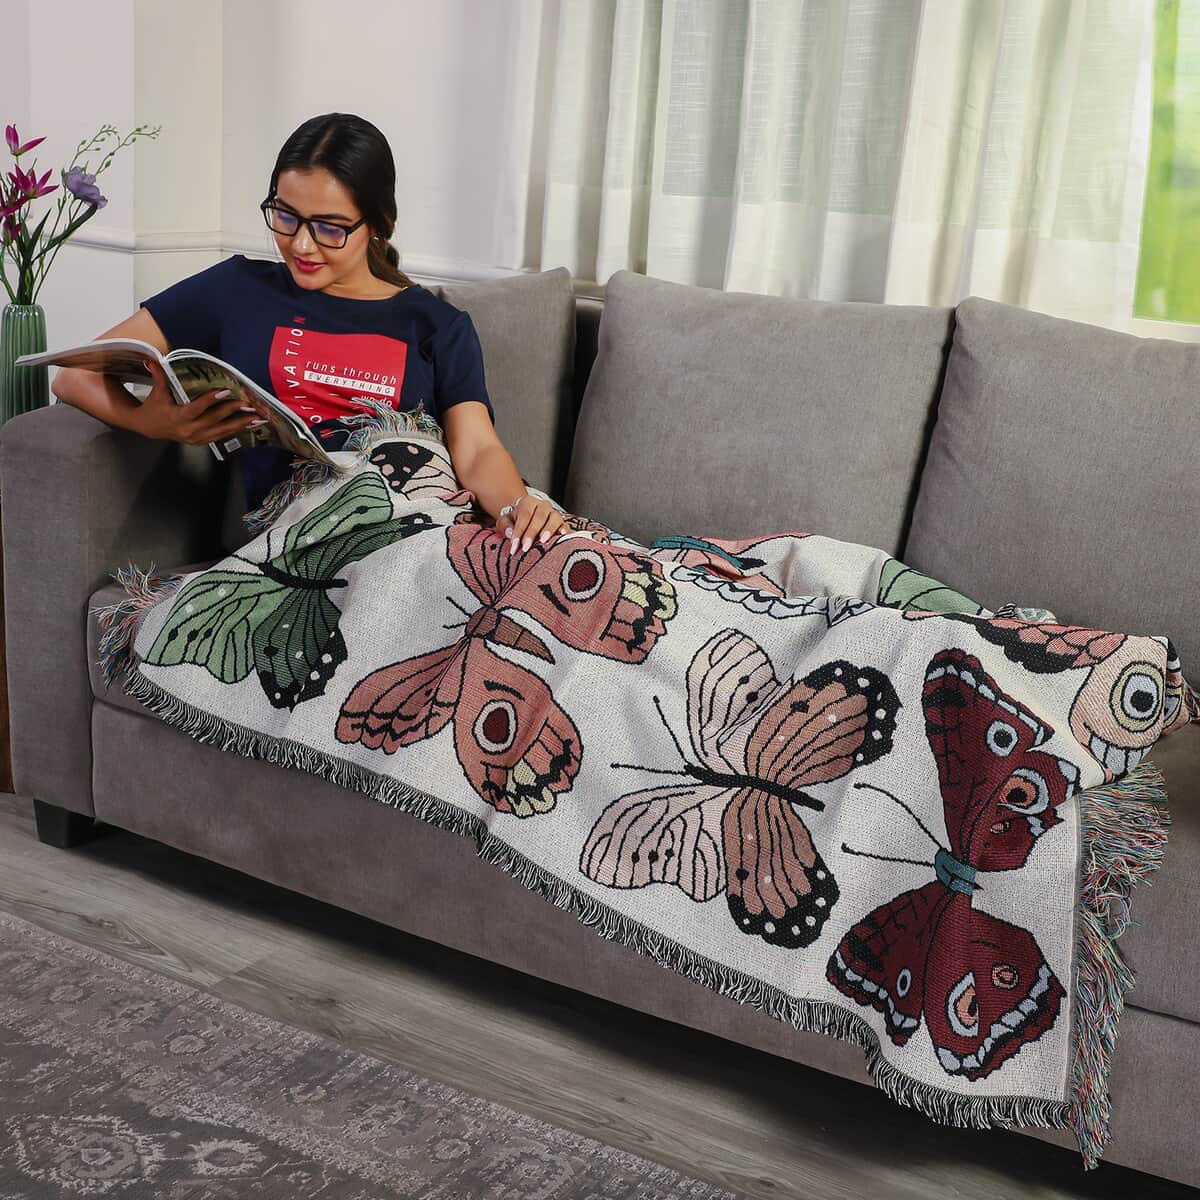 Multi Color Jacquard Butterfly Woven Printed Cotton Throw with Fringes (50"x60") 1.65lbs image number 1